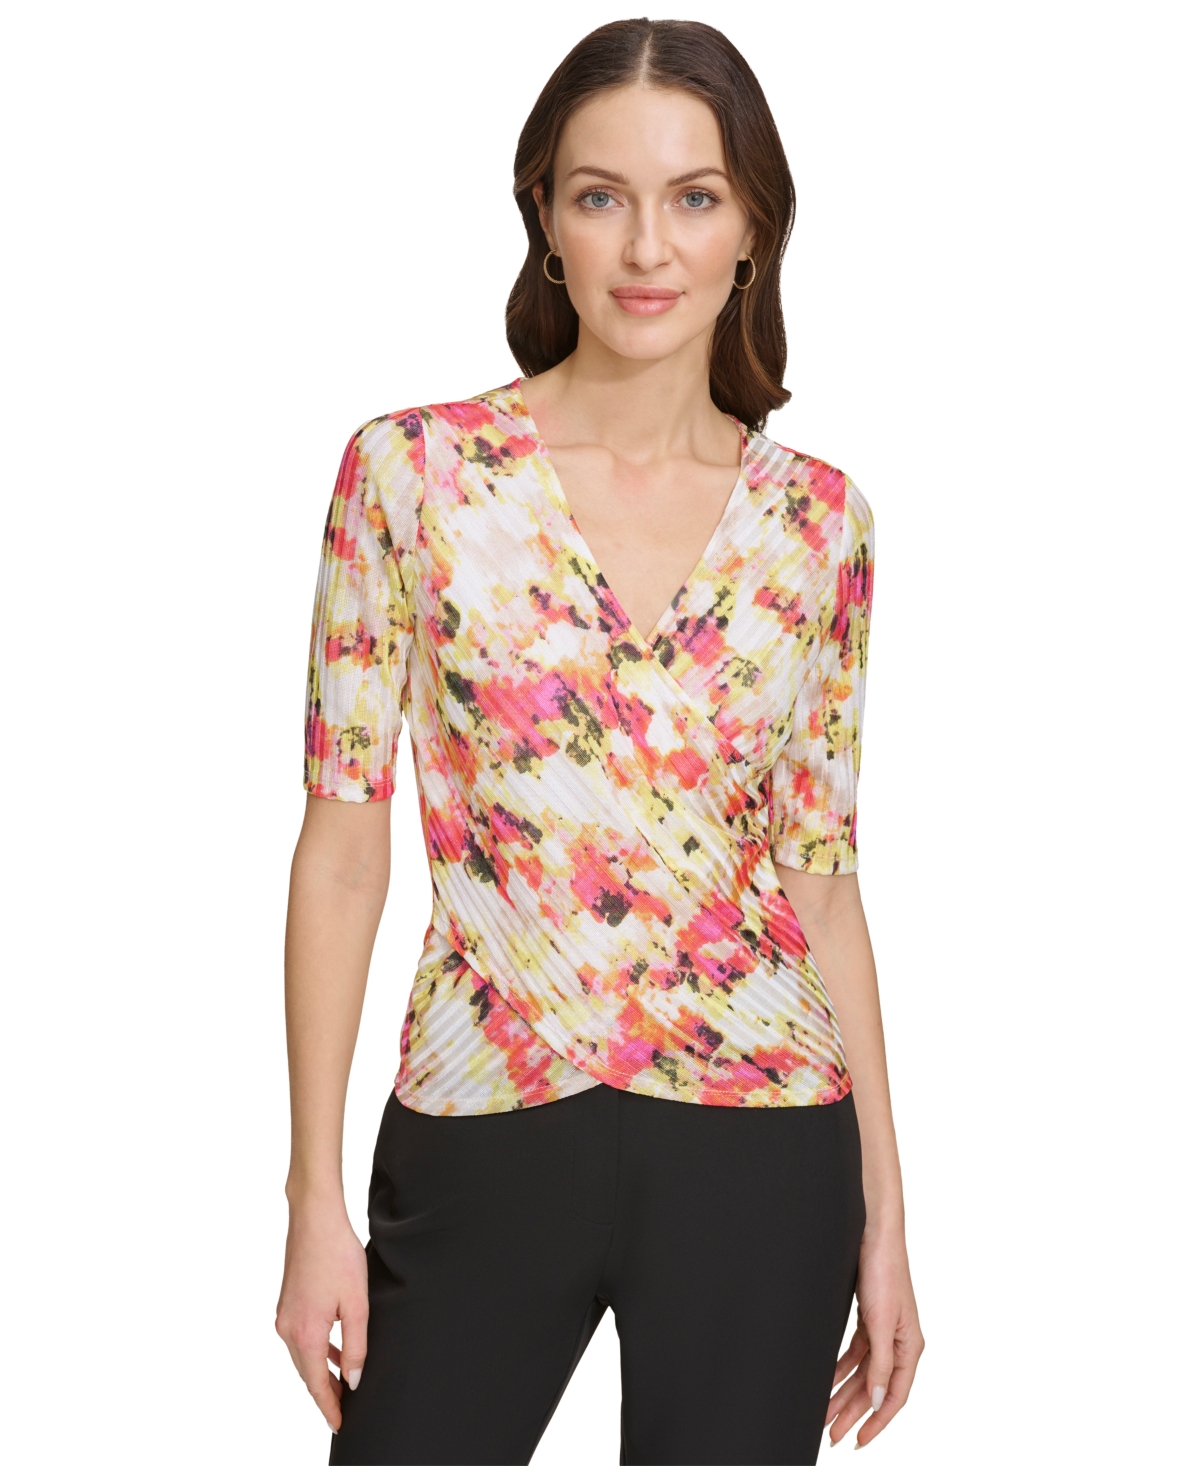 Dkny Women's Printed Textured Surplice Top In Ivory,orange Blossom Multi